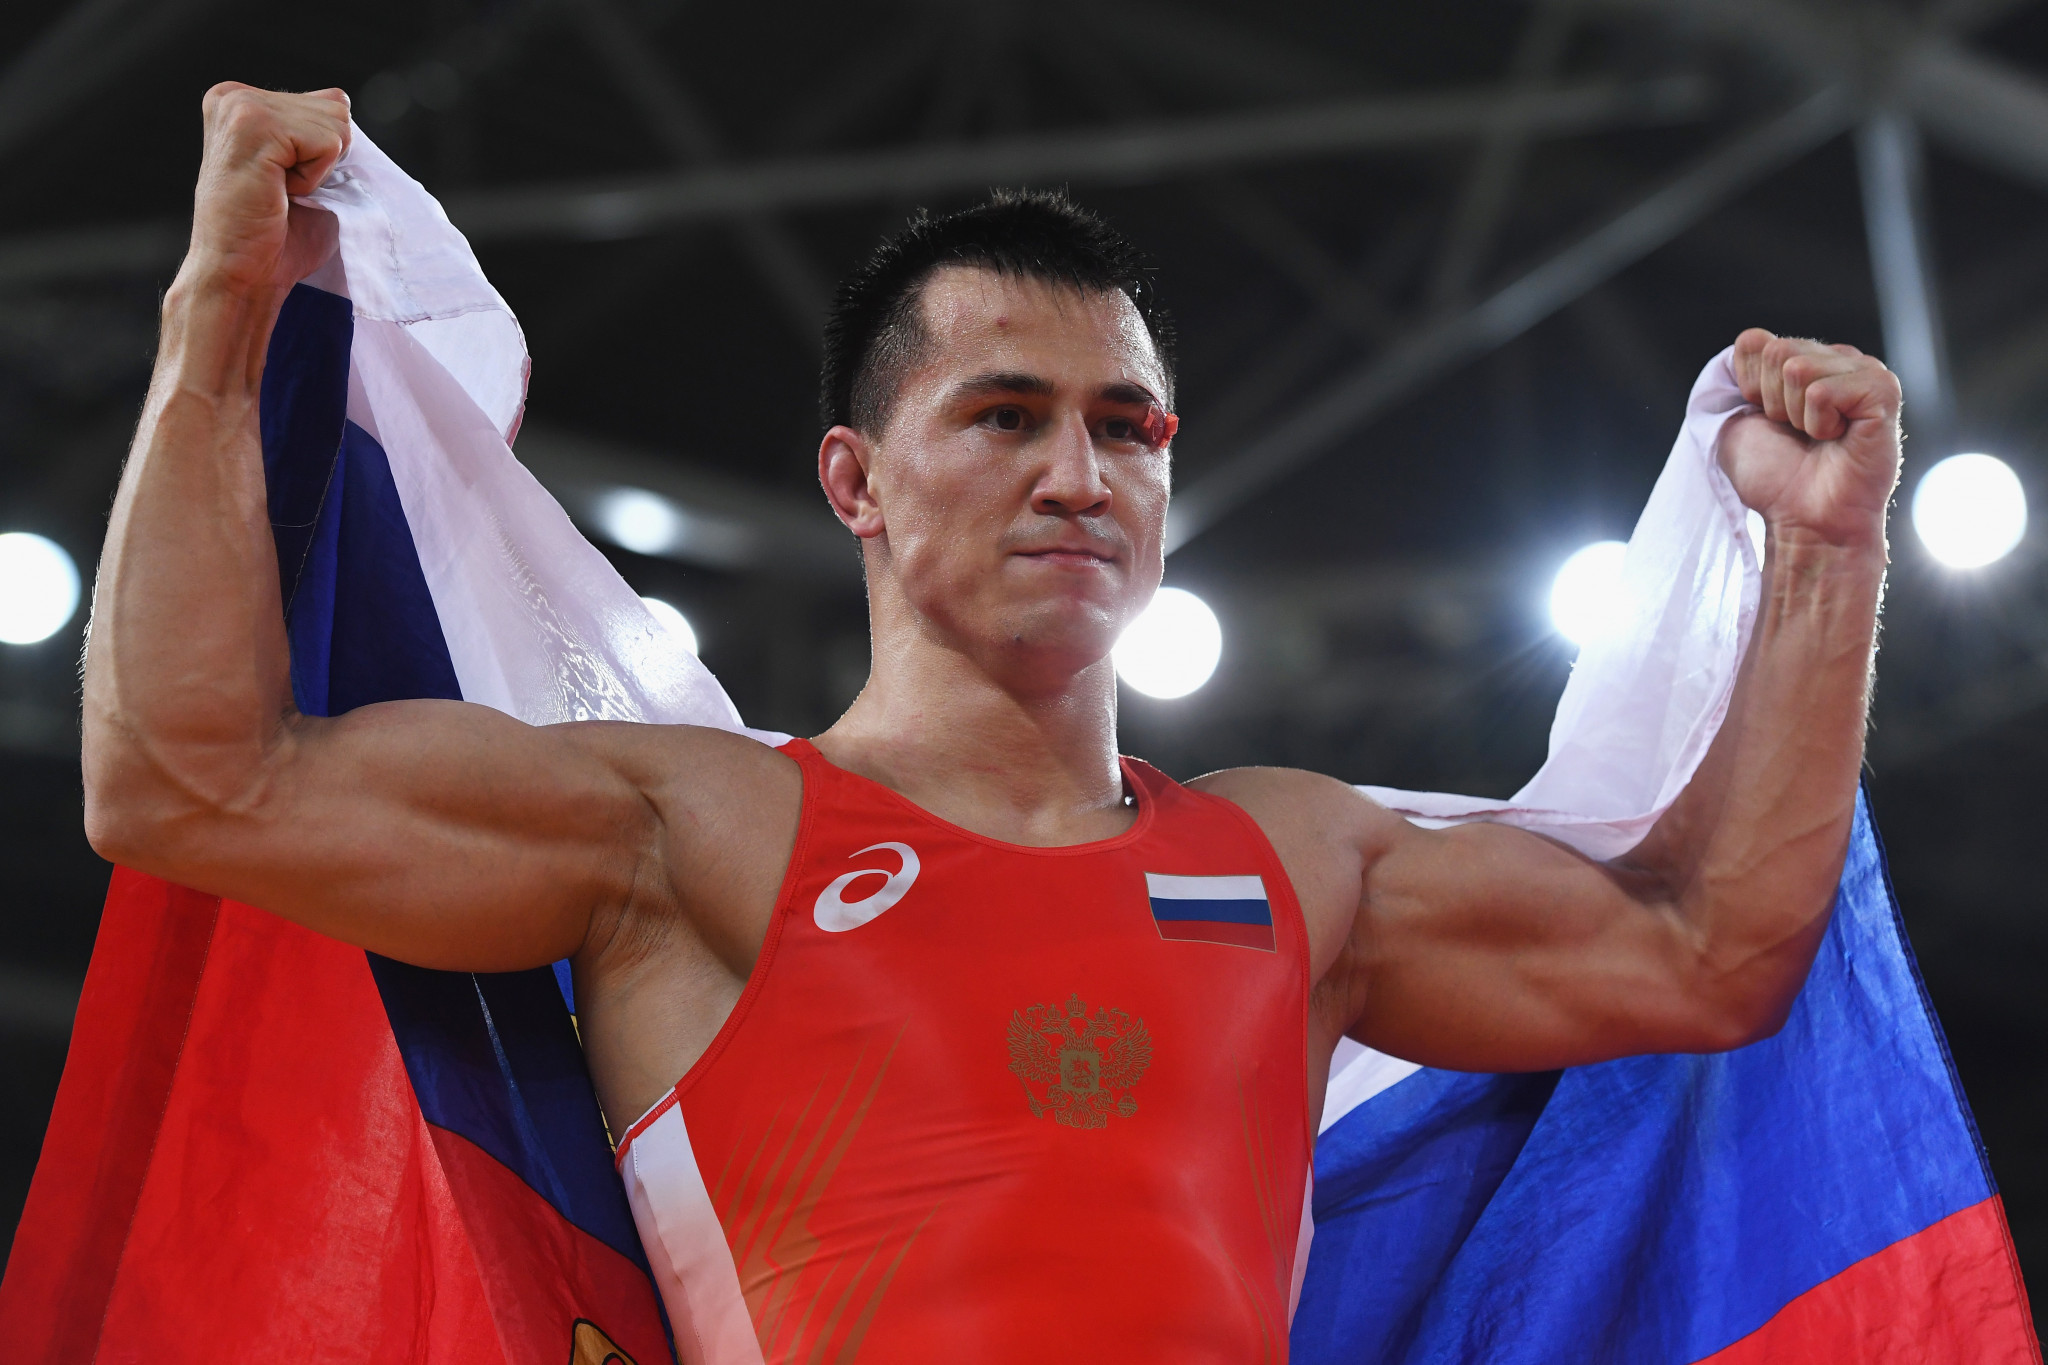 Roman Vlasov won the Greco-Roman 77kg gold medal ©Getty Images